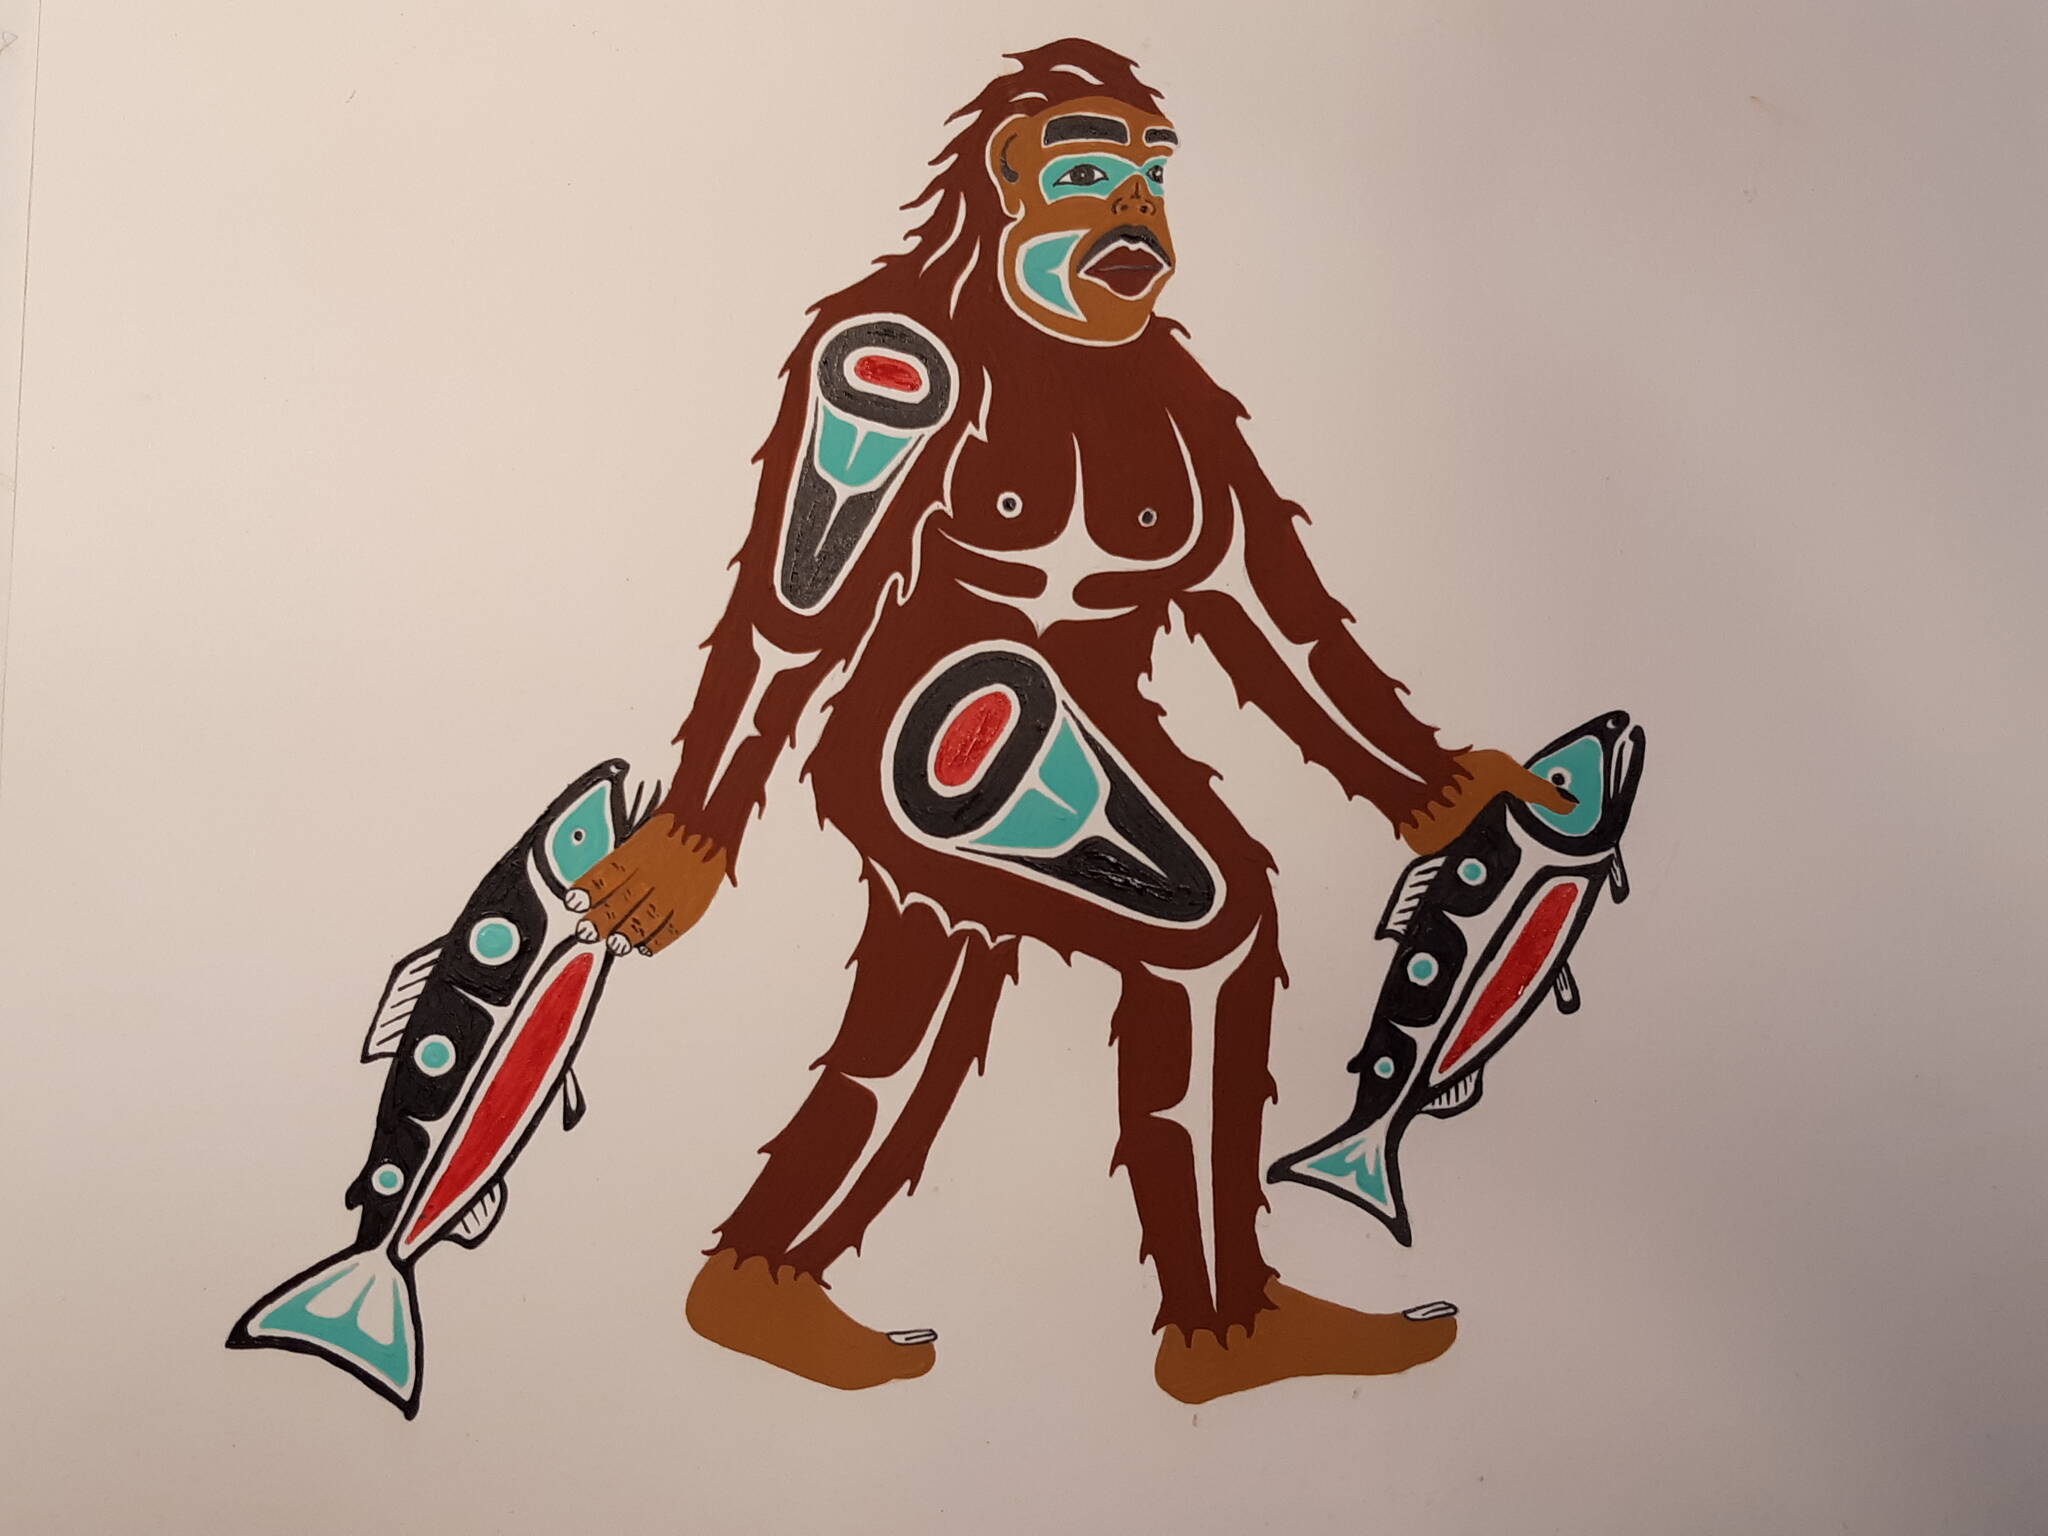 Artist Thomas Sewid will be displaying his work at the Juneau Bigfoot Town Hall on Sept. 8. This design, “Sasquatch Salmon Season,” was inspired by a story he heard of a campsite encounter where Bigfoot was seen walking up a river with a salmon in each hand. (Photo courtesy of Thomas Sewid)